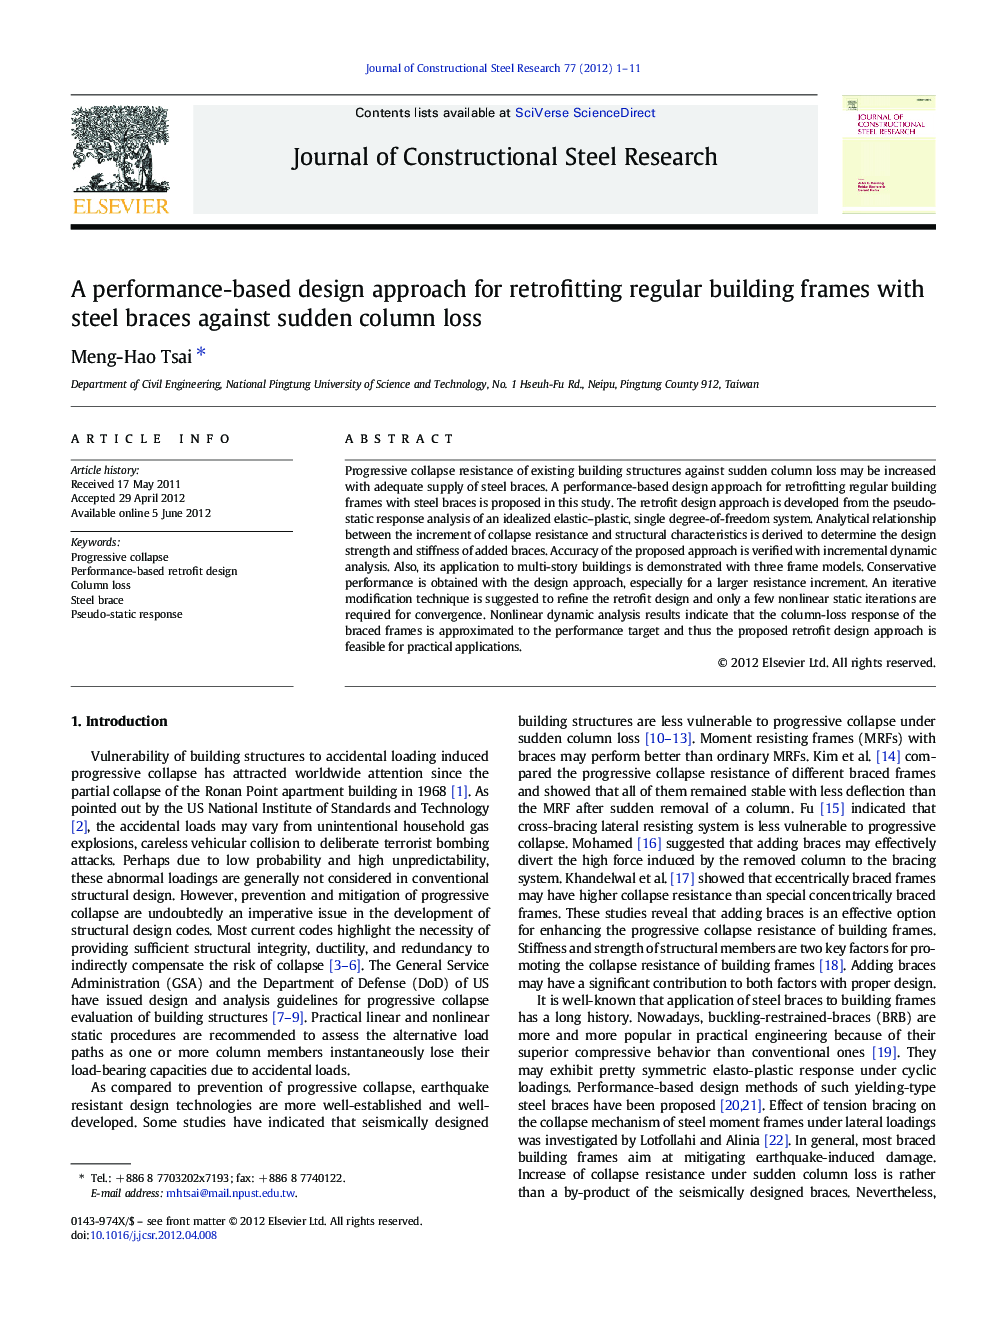 A performance-based design approach for retrofitting regular building frames with steel braces against sudden column loss